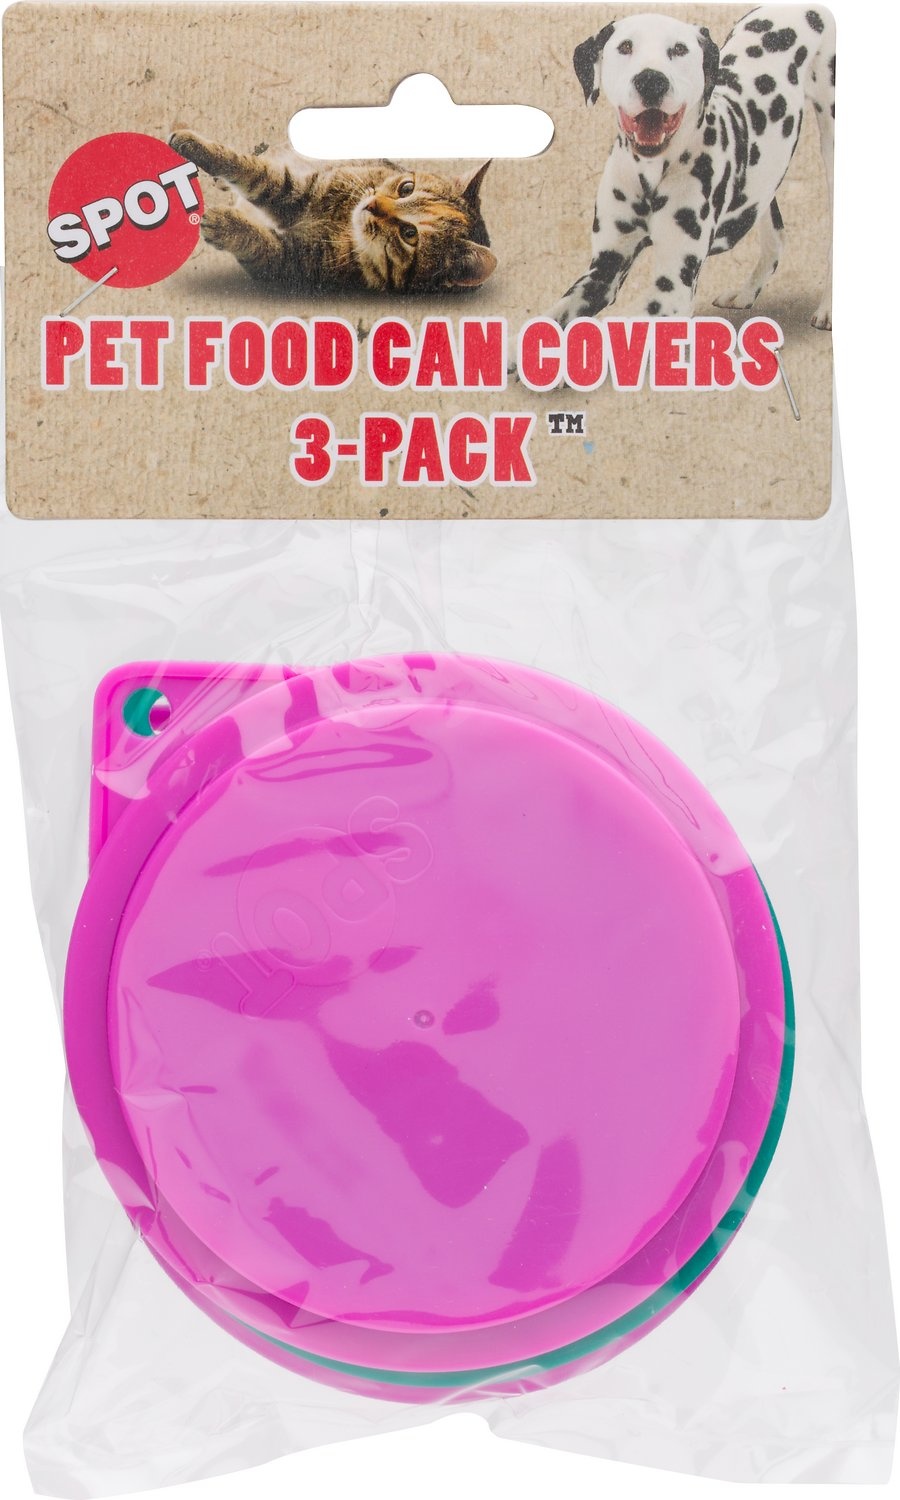 Ethical Pet Can Covers